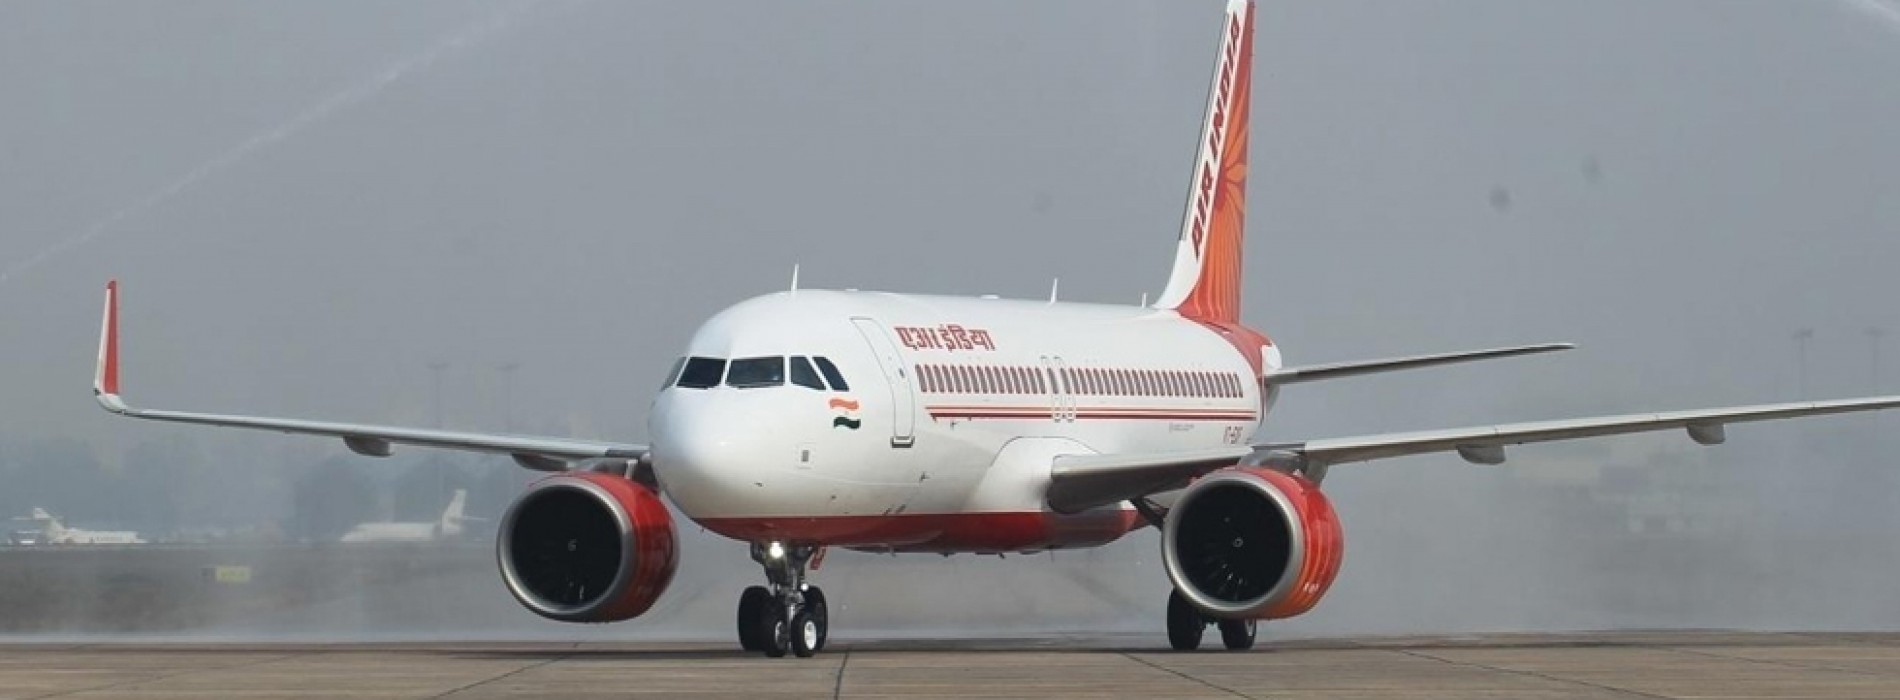 Air India renews insurance for $14 m with 20% discount over last year